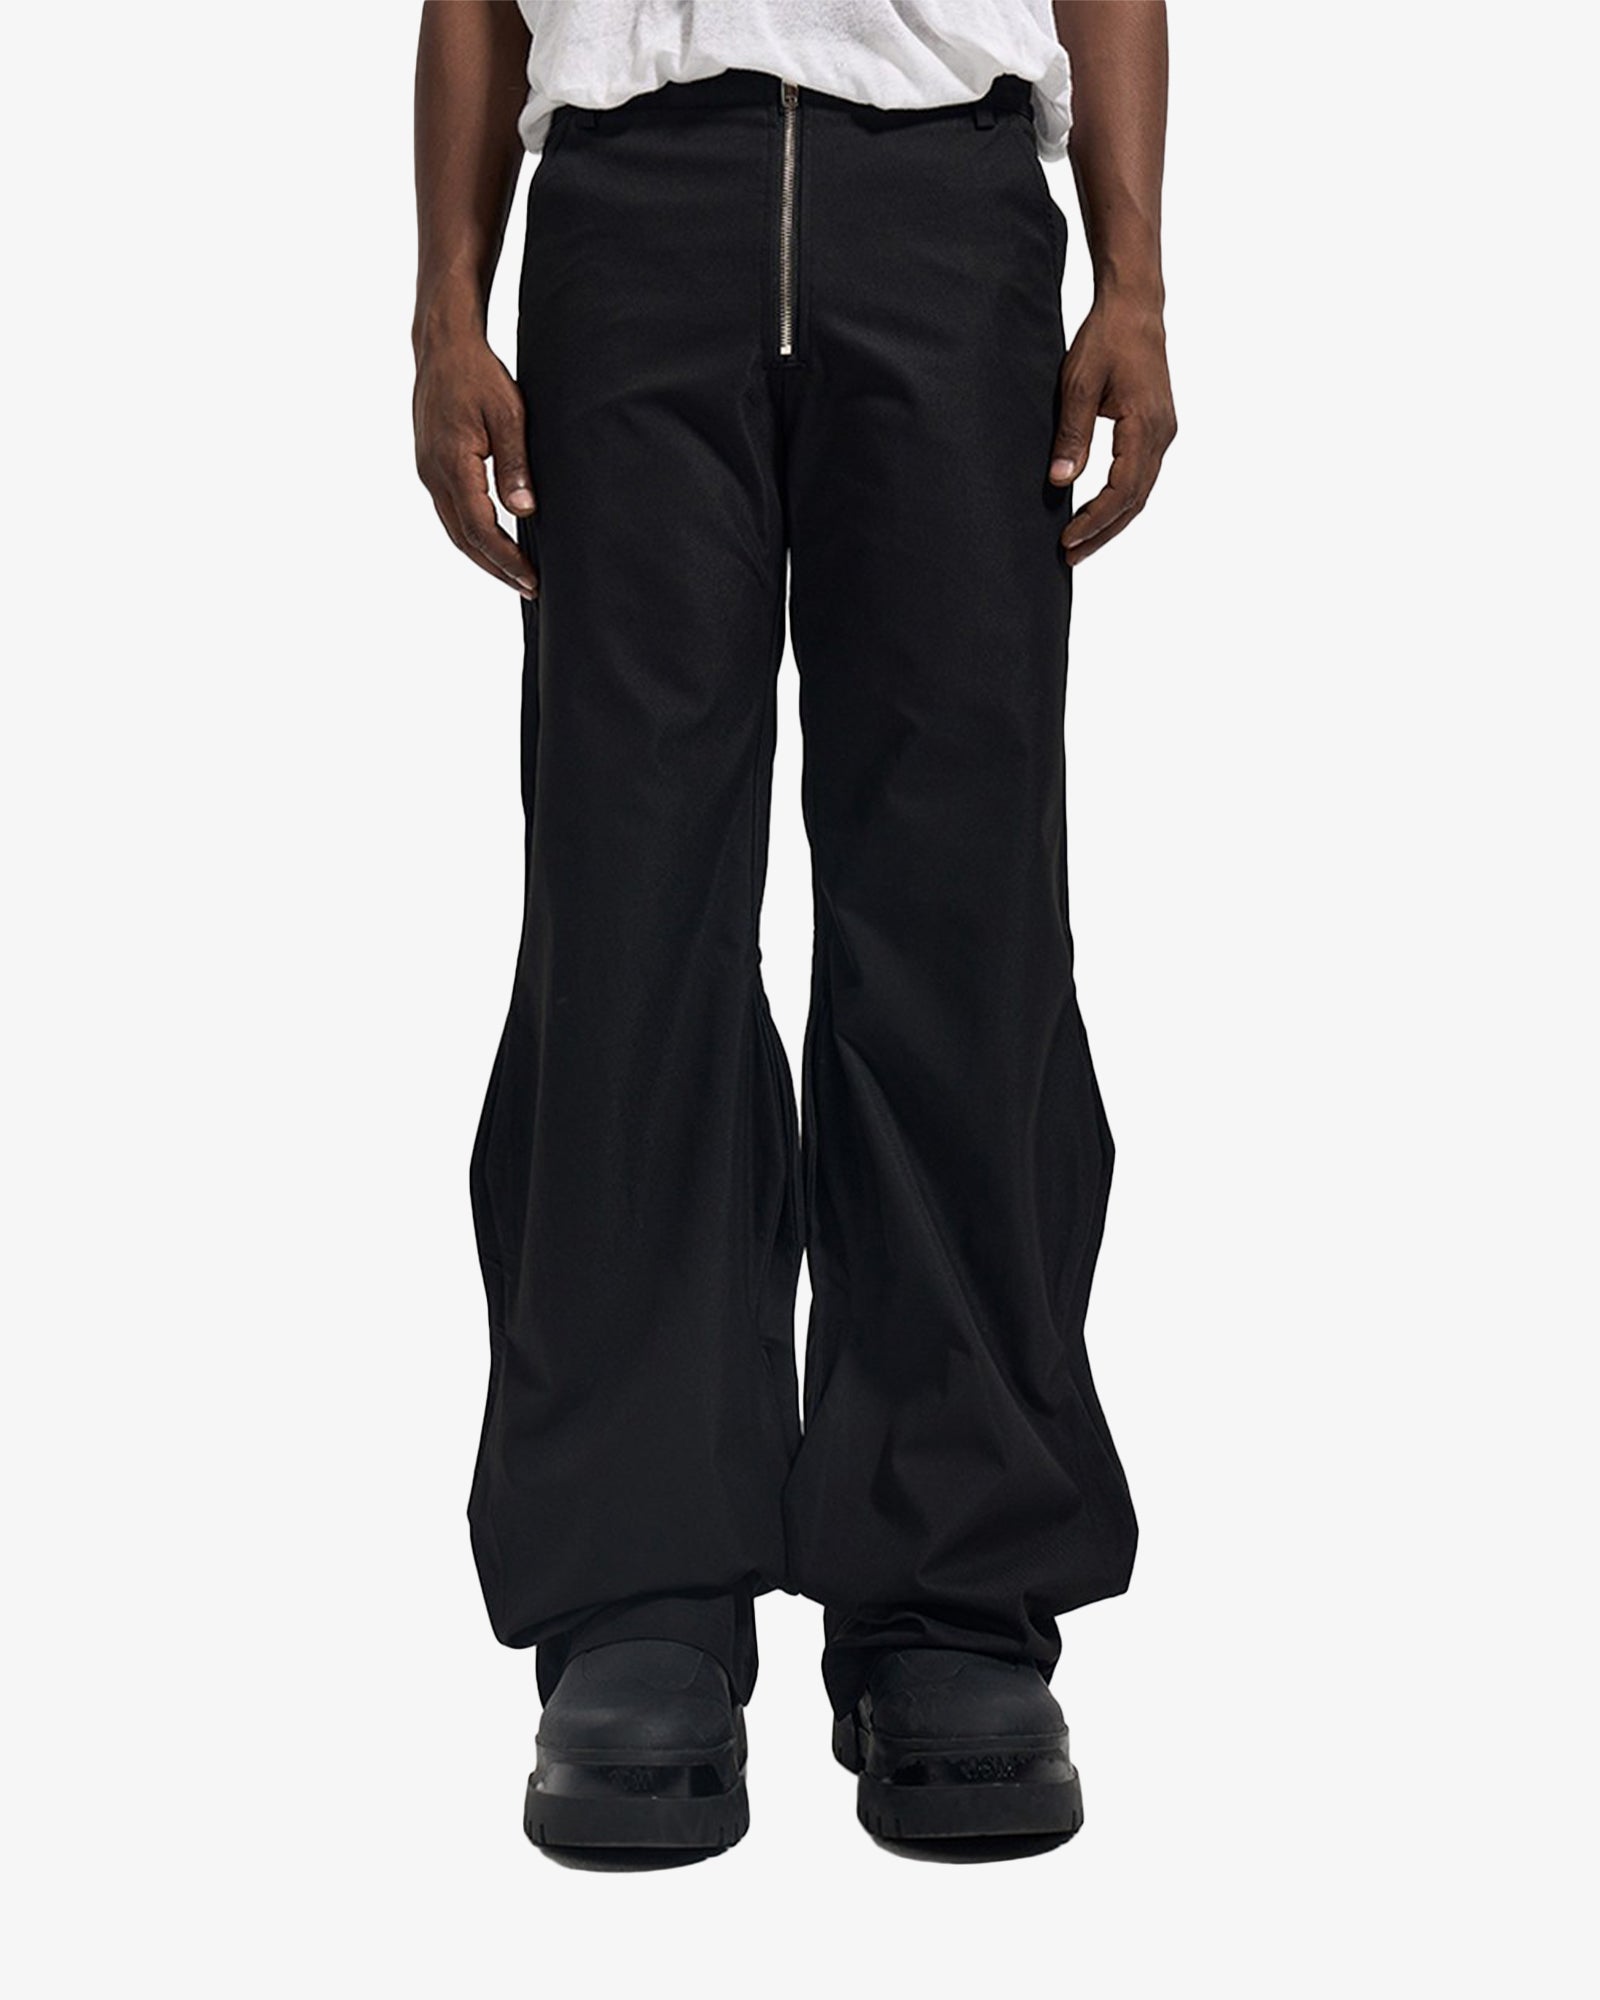 Wide Fit Exposed Zipper Pants